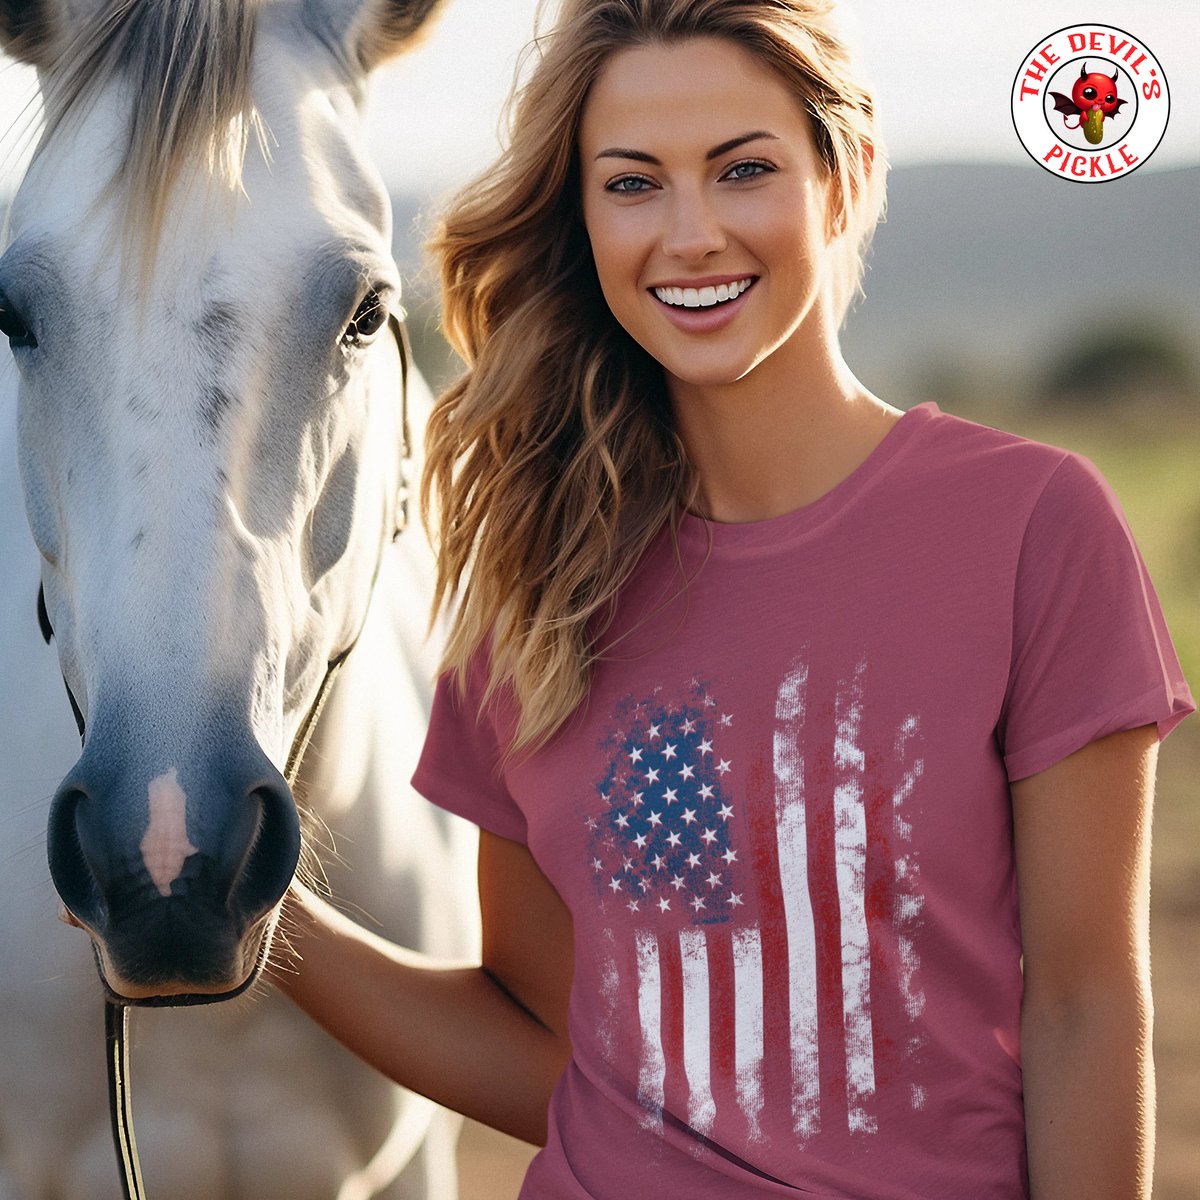 Feeling a little rough around the edges, just like my Distressed American Flag tee. The Best Patriotic Apparel at The Devil's Pickle!

#adultinghumor #USA #americanpride #offensive #offensivetshirts #byob #UnitedStates #hellyeahamerica #ProudAmerican #Freedom #onlythebest #merica